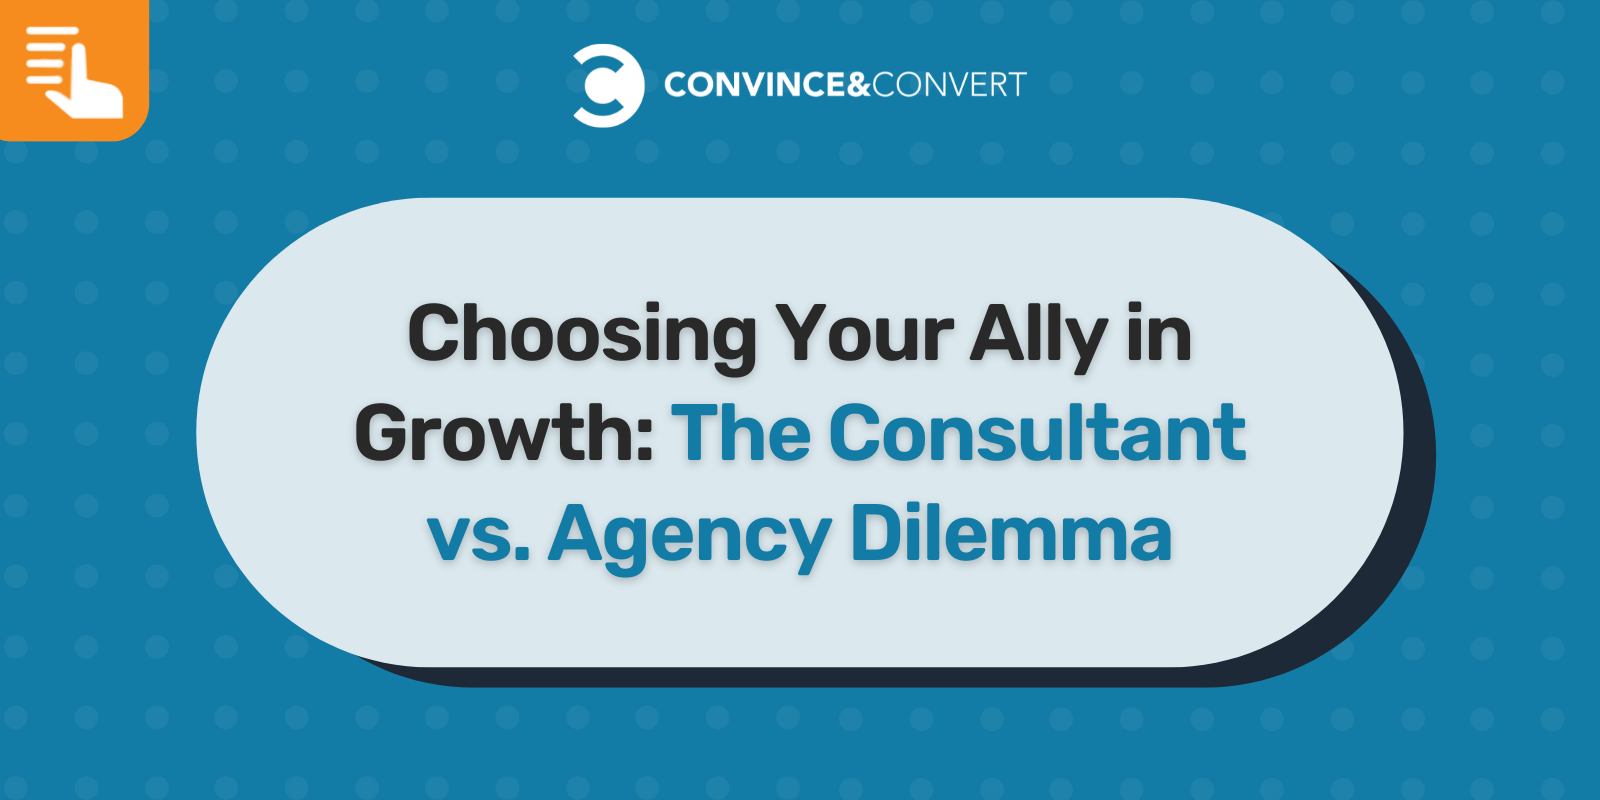 Choosing Your Ally in Growth The Consultant vs. Agency Dilemma CTA